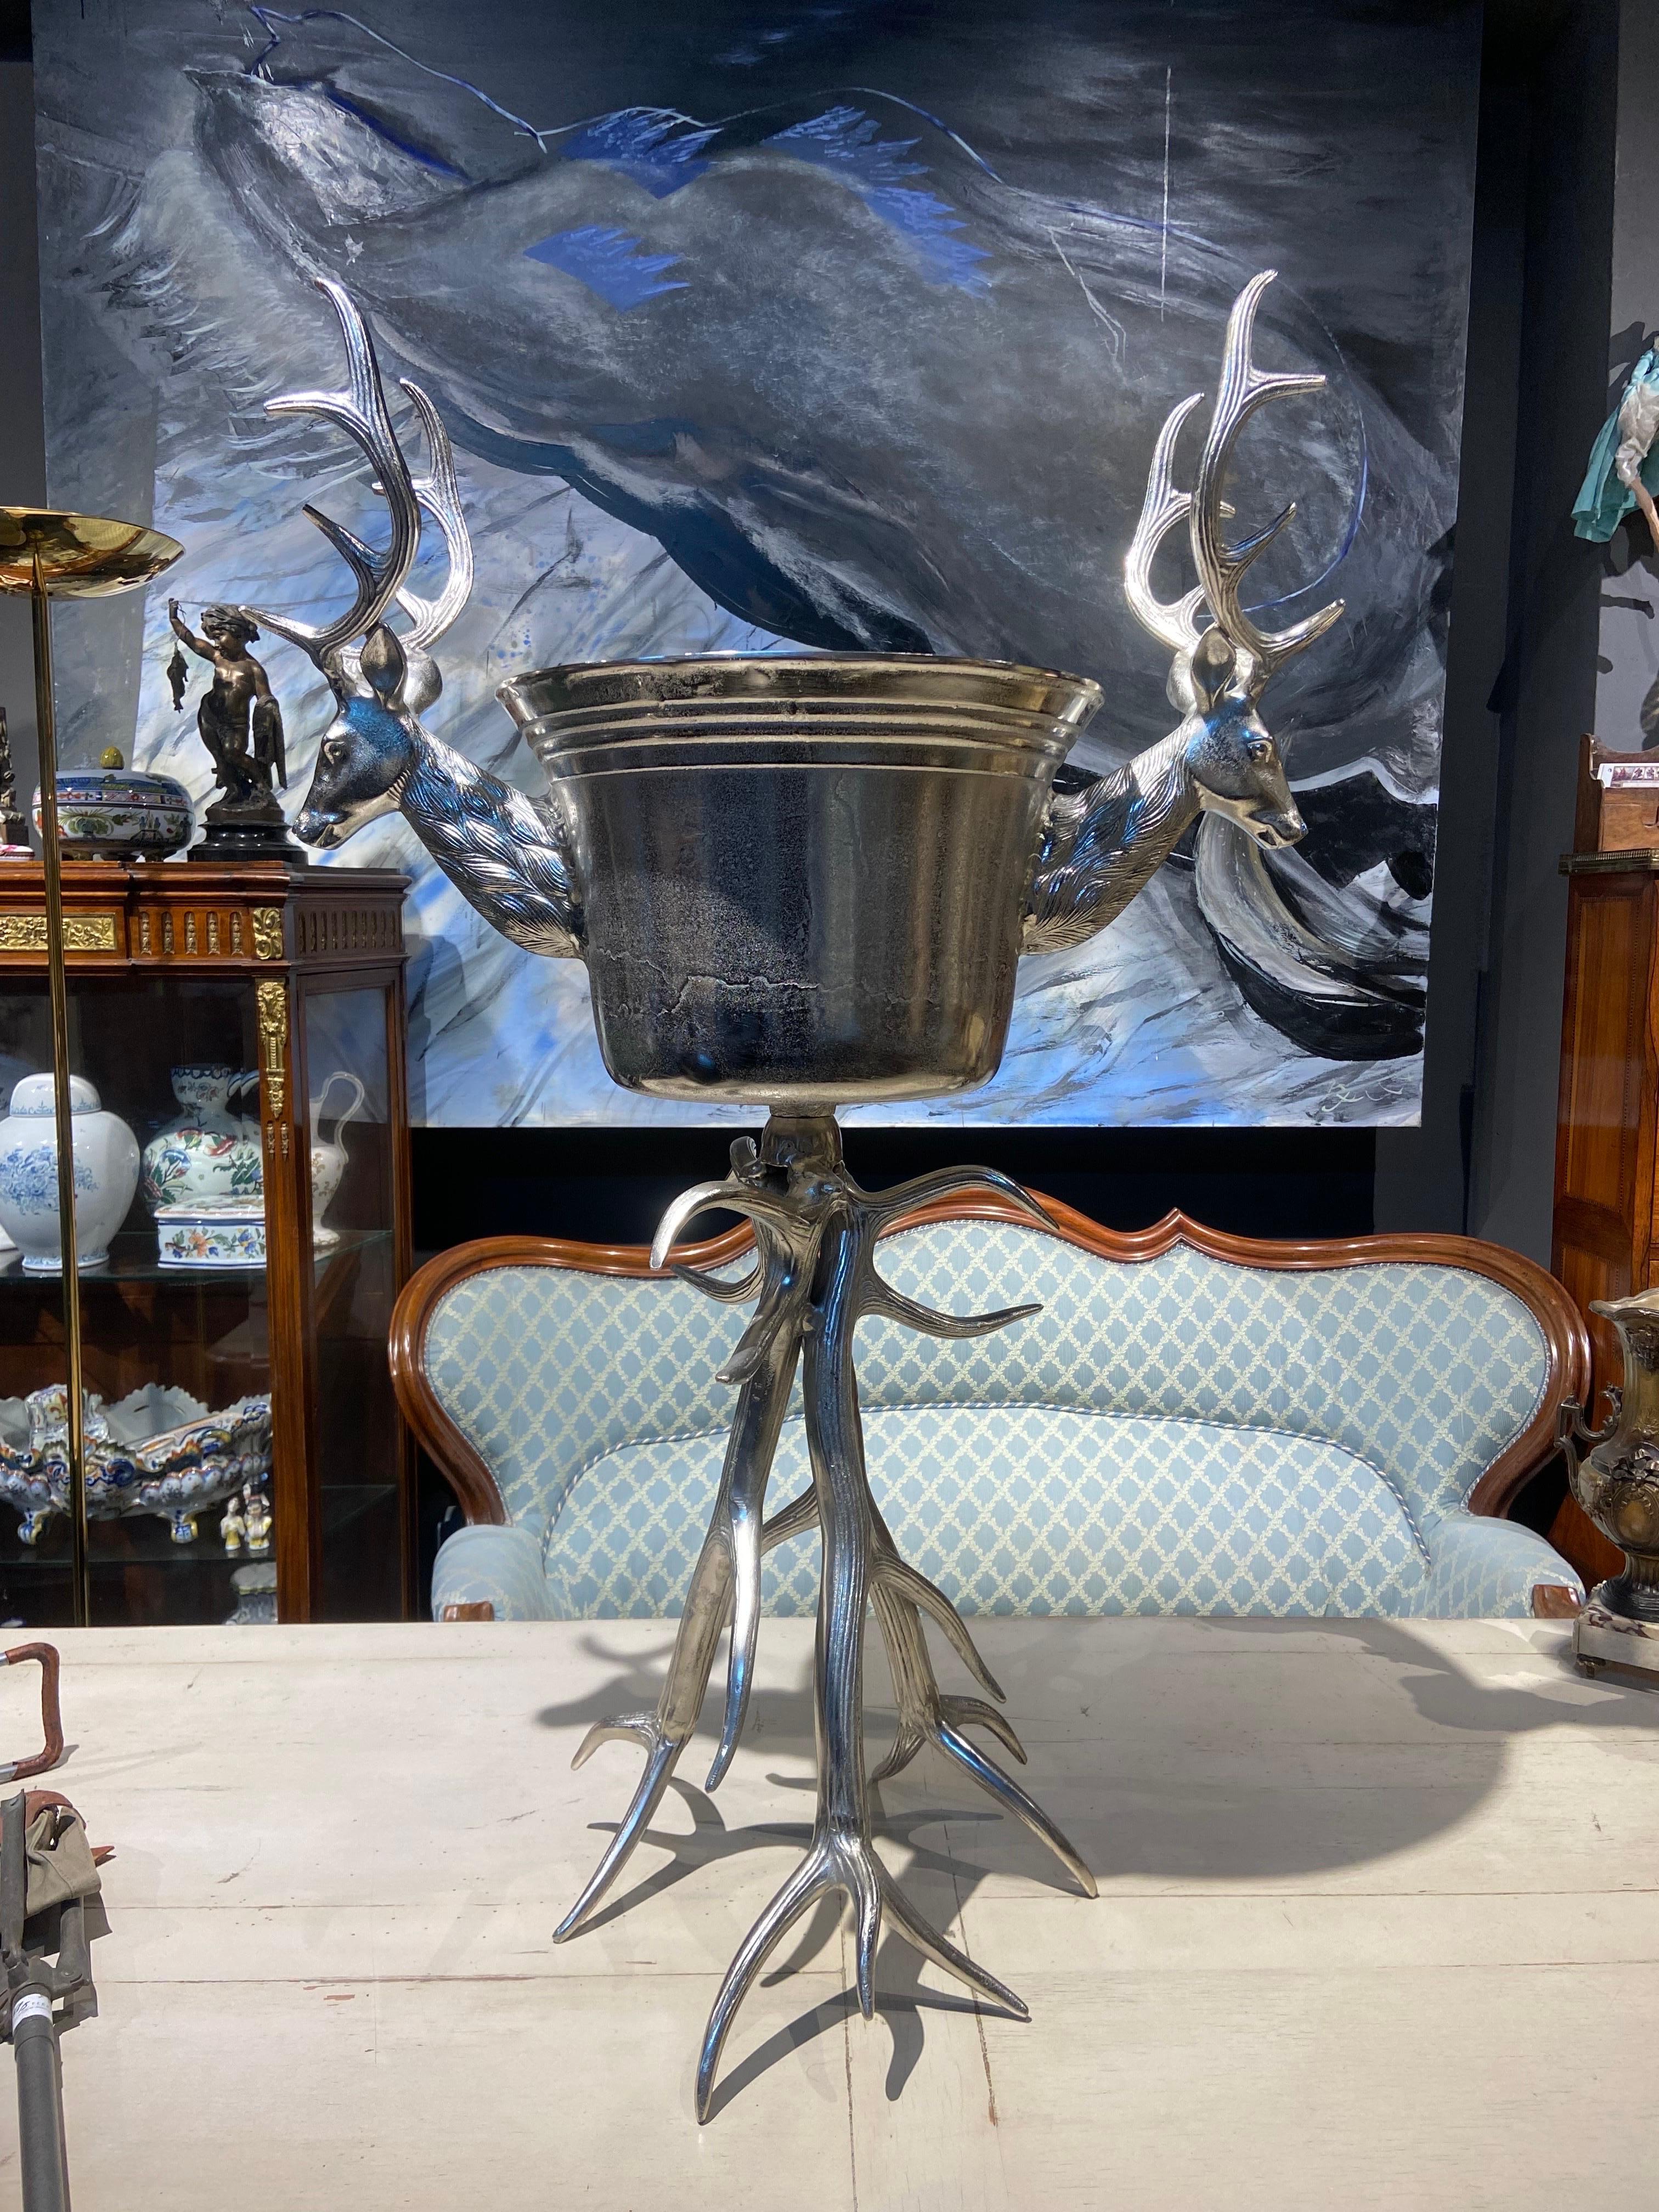 French large metal wine cooler standing on a deer antler stand in very good condition. The stand is like deer horns, locked to give stability to the central bucket. The shining silver metal stag heads sit proud either side of it with gorgeous